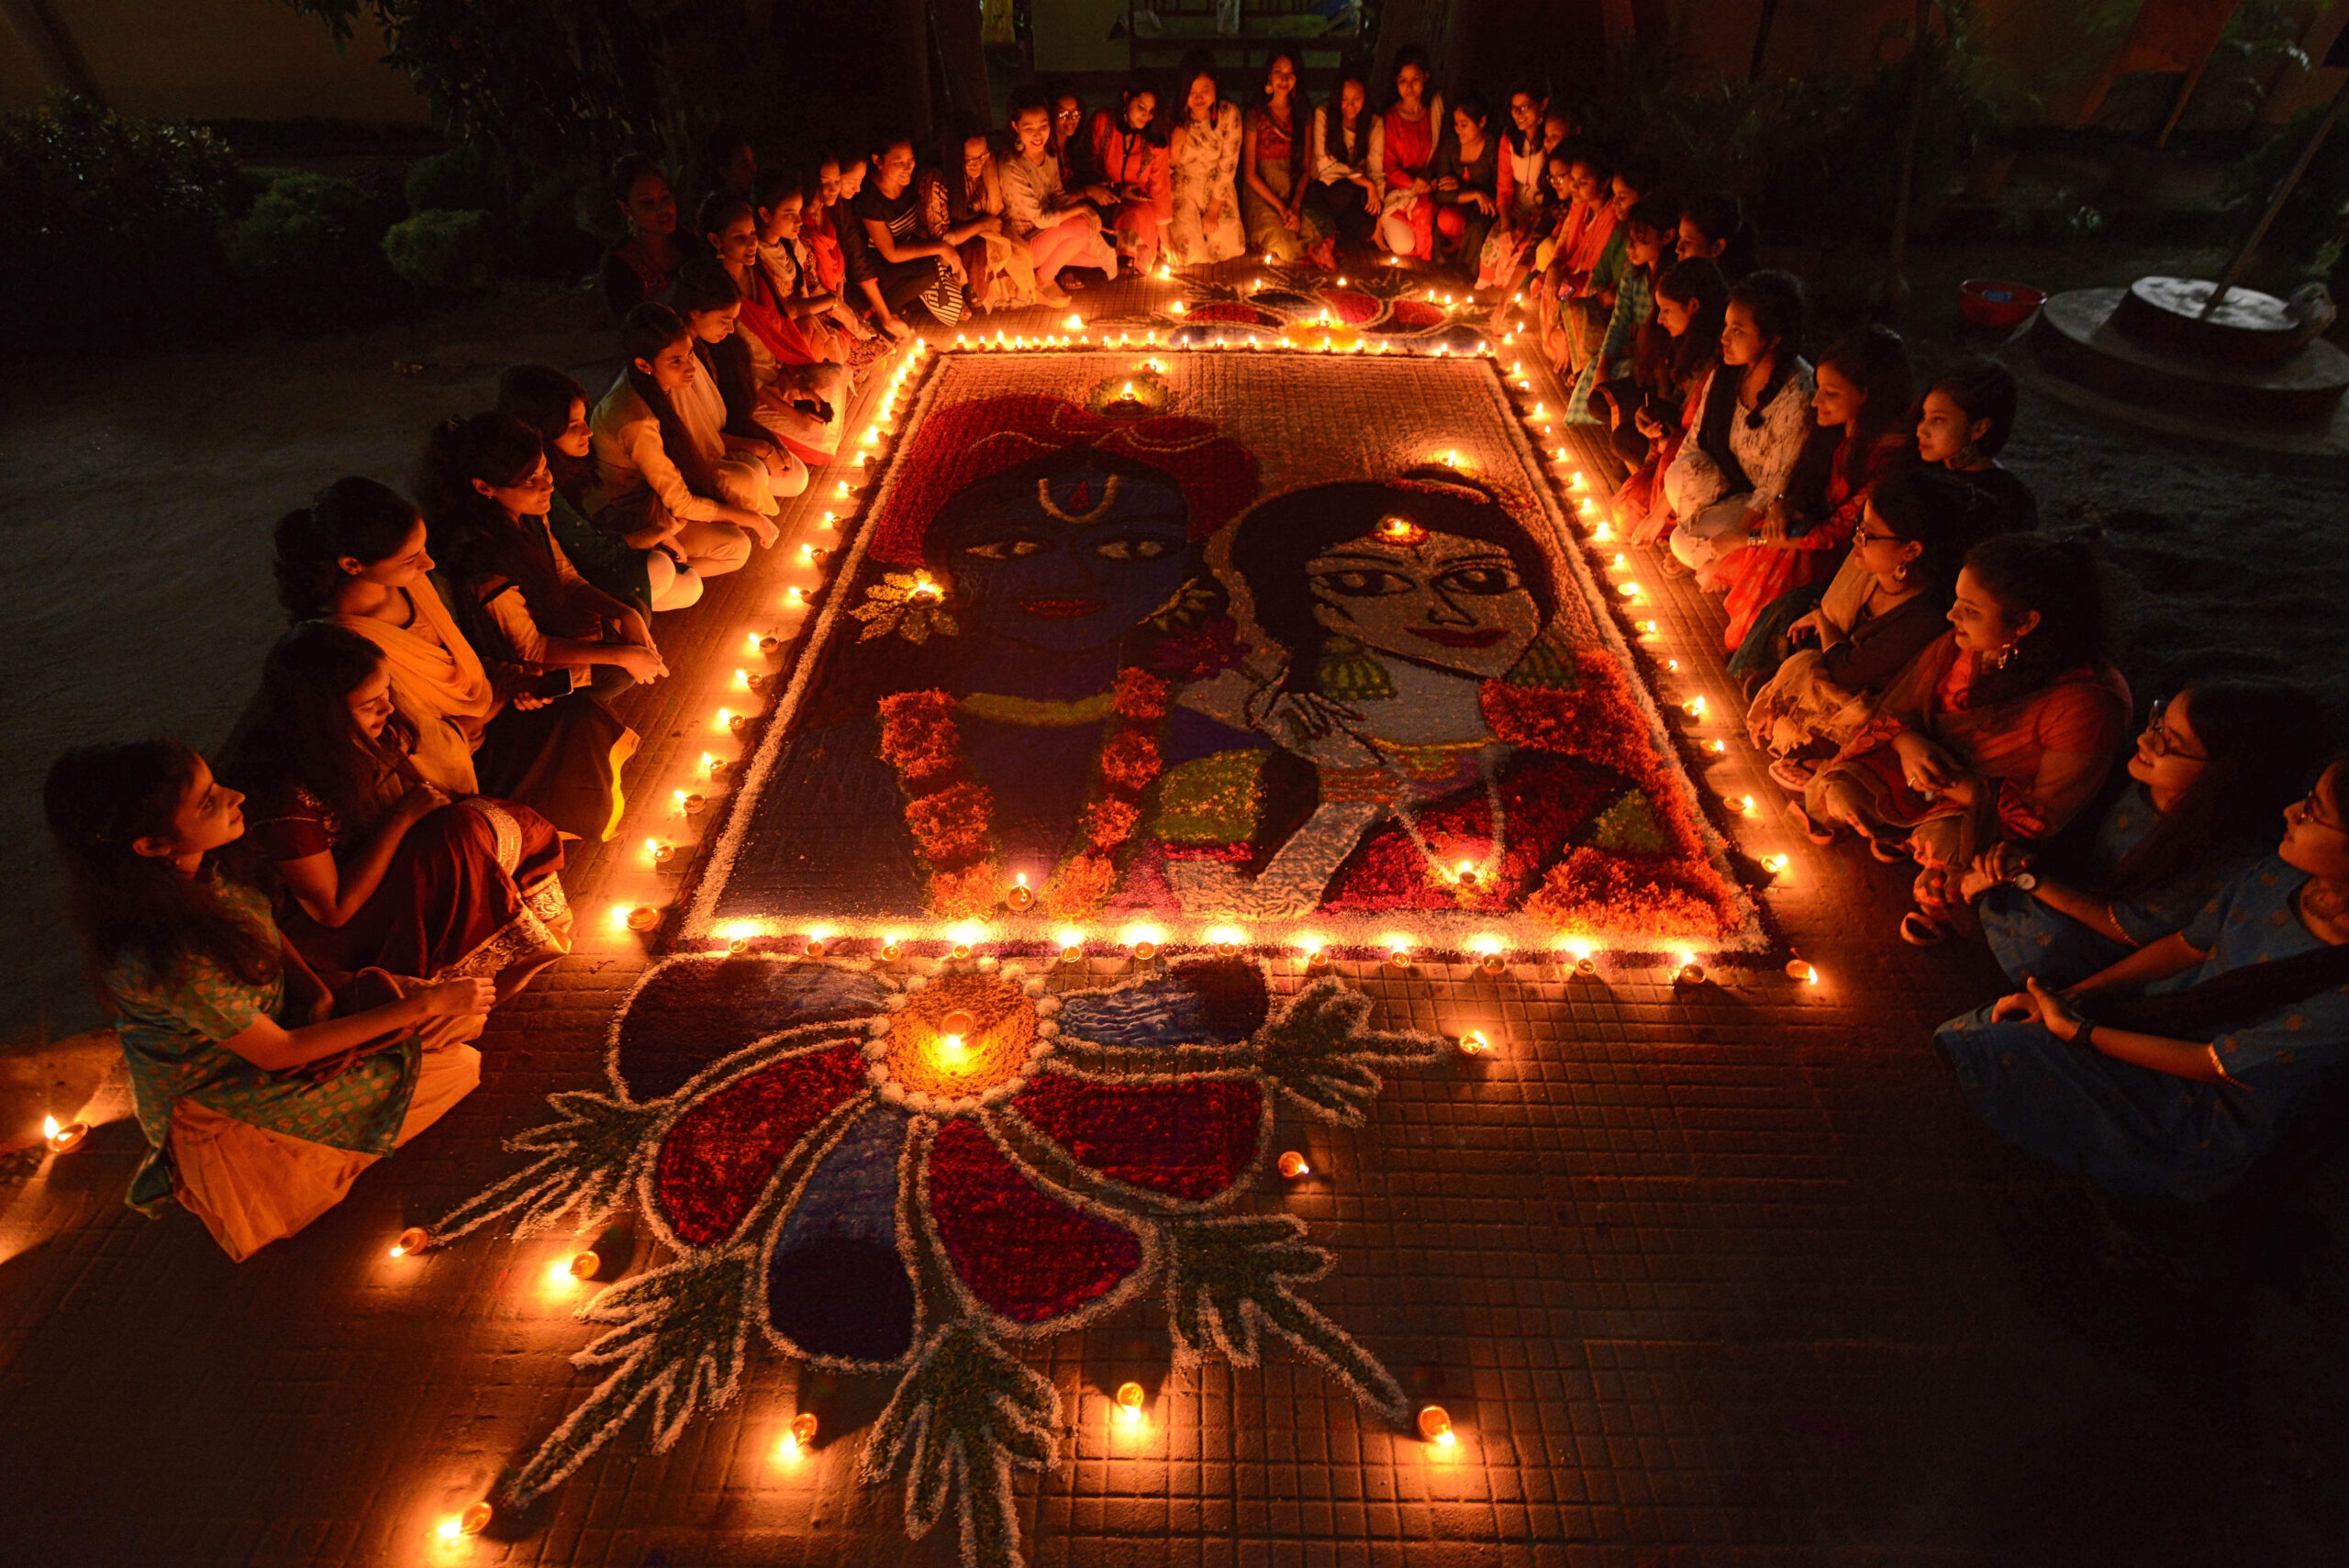 Diwali 2018 Photos Hindu Festival Of Lights Celebrated In India The World